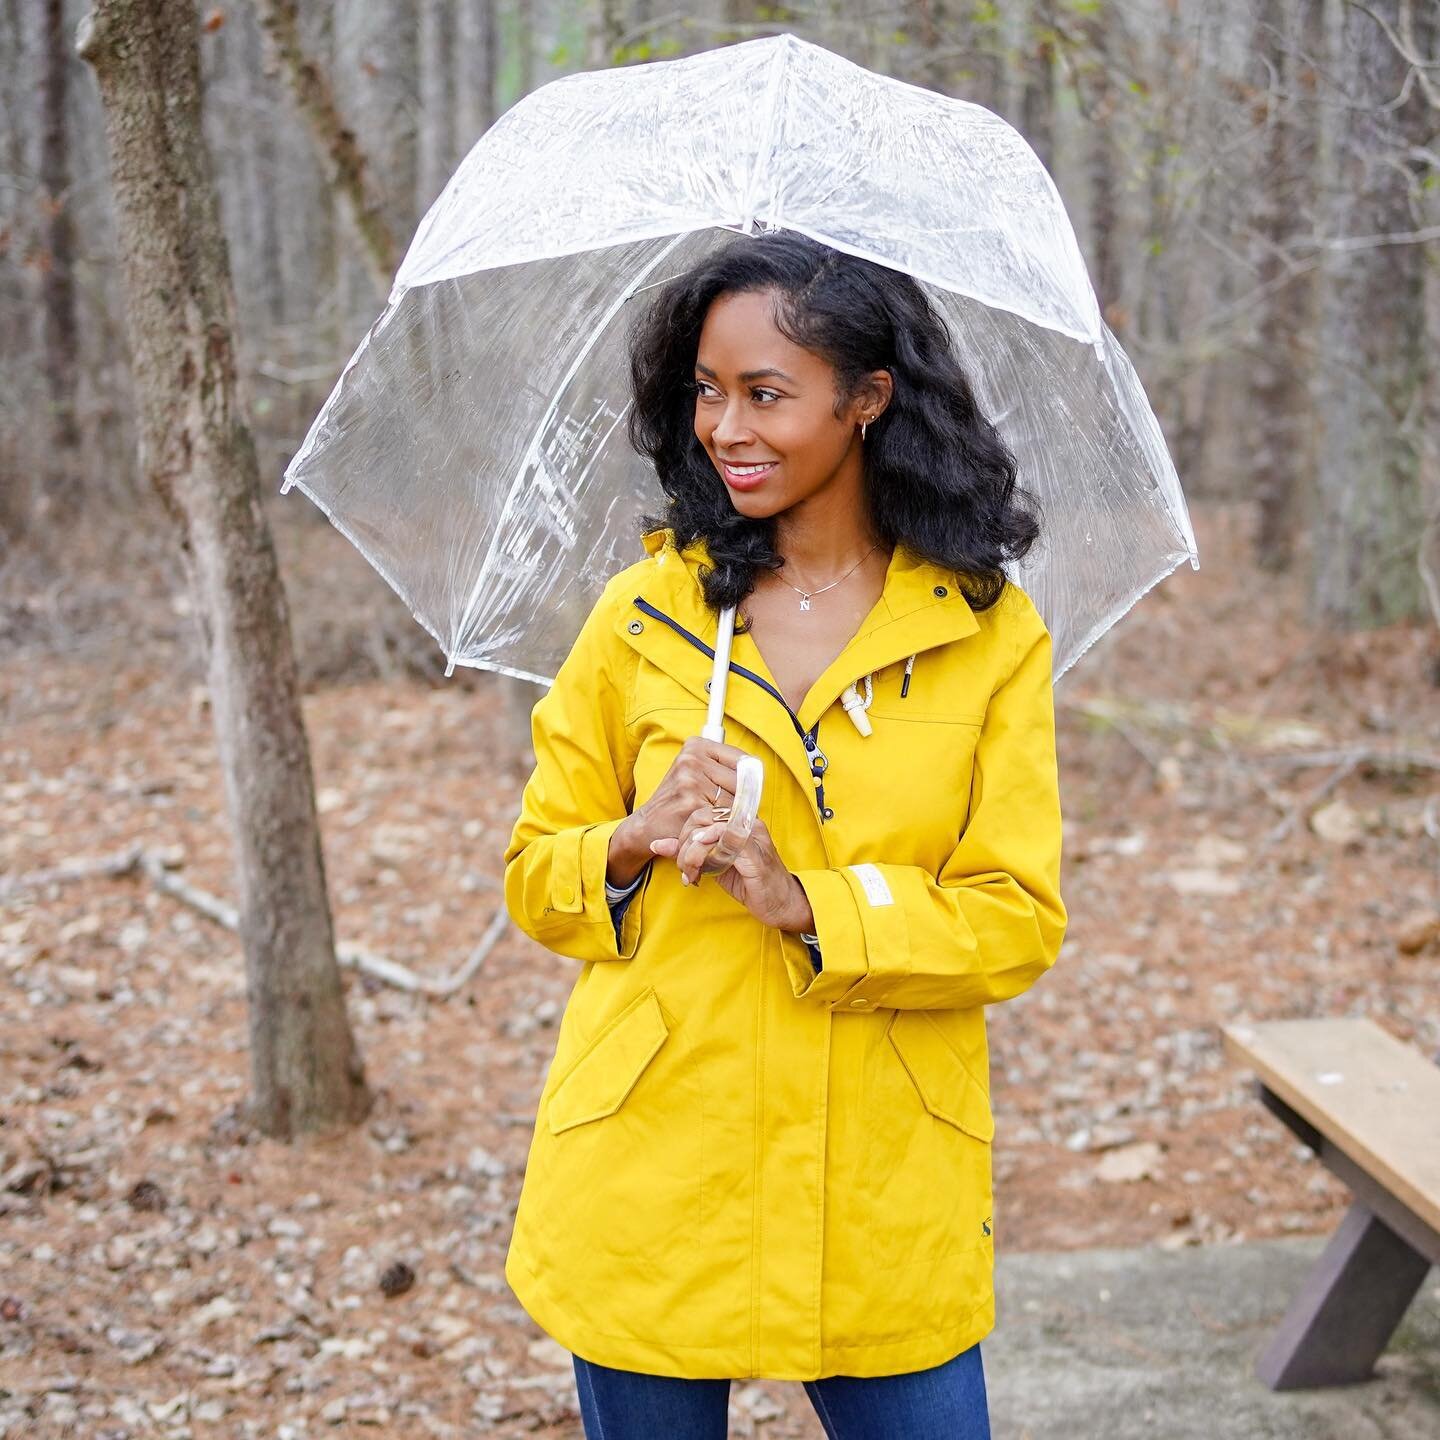 Just because it may be a rainy day does not mean you have to sacrifice style to stay dry. Currently, crushing on this yellow raincoat from @joulesusa. Now I just have to get some wellies to match! 💛 #joulesusa #joulesrightasrain #sponsored